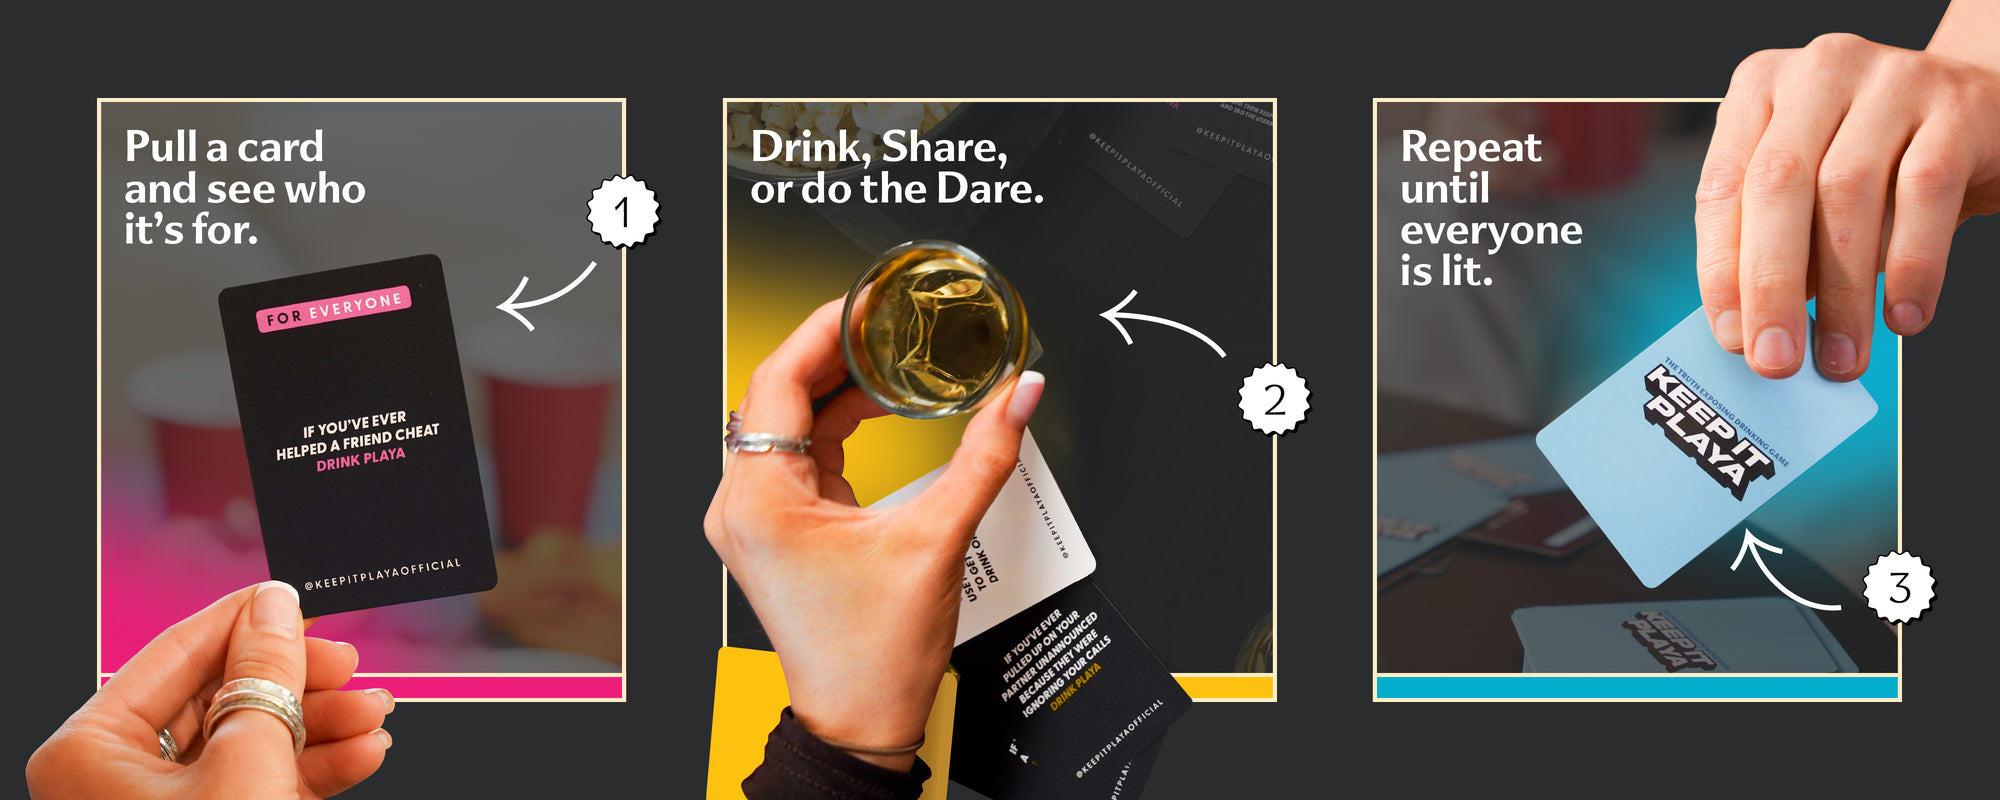 1 Pull a card and see who it's for. 2 Drink, share, or do the dare. 3 Repeat until everyone is lit.